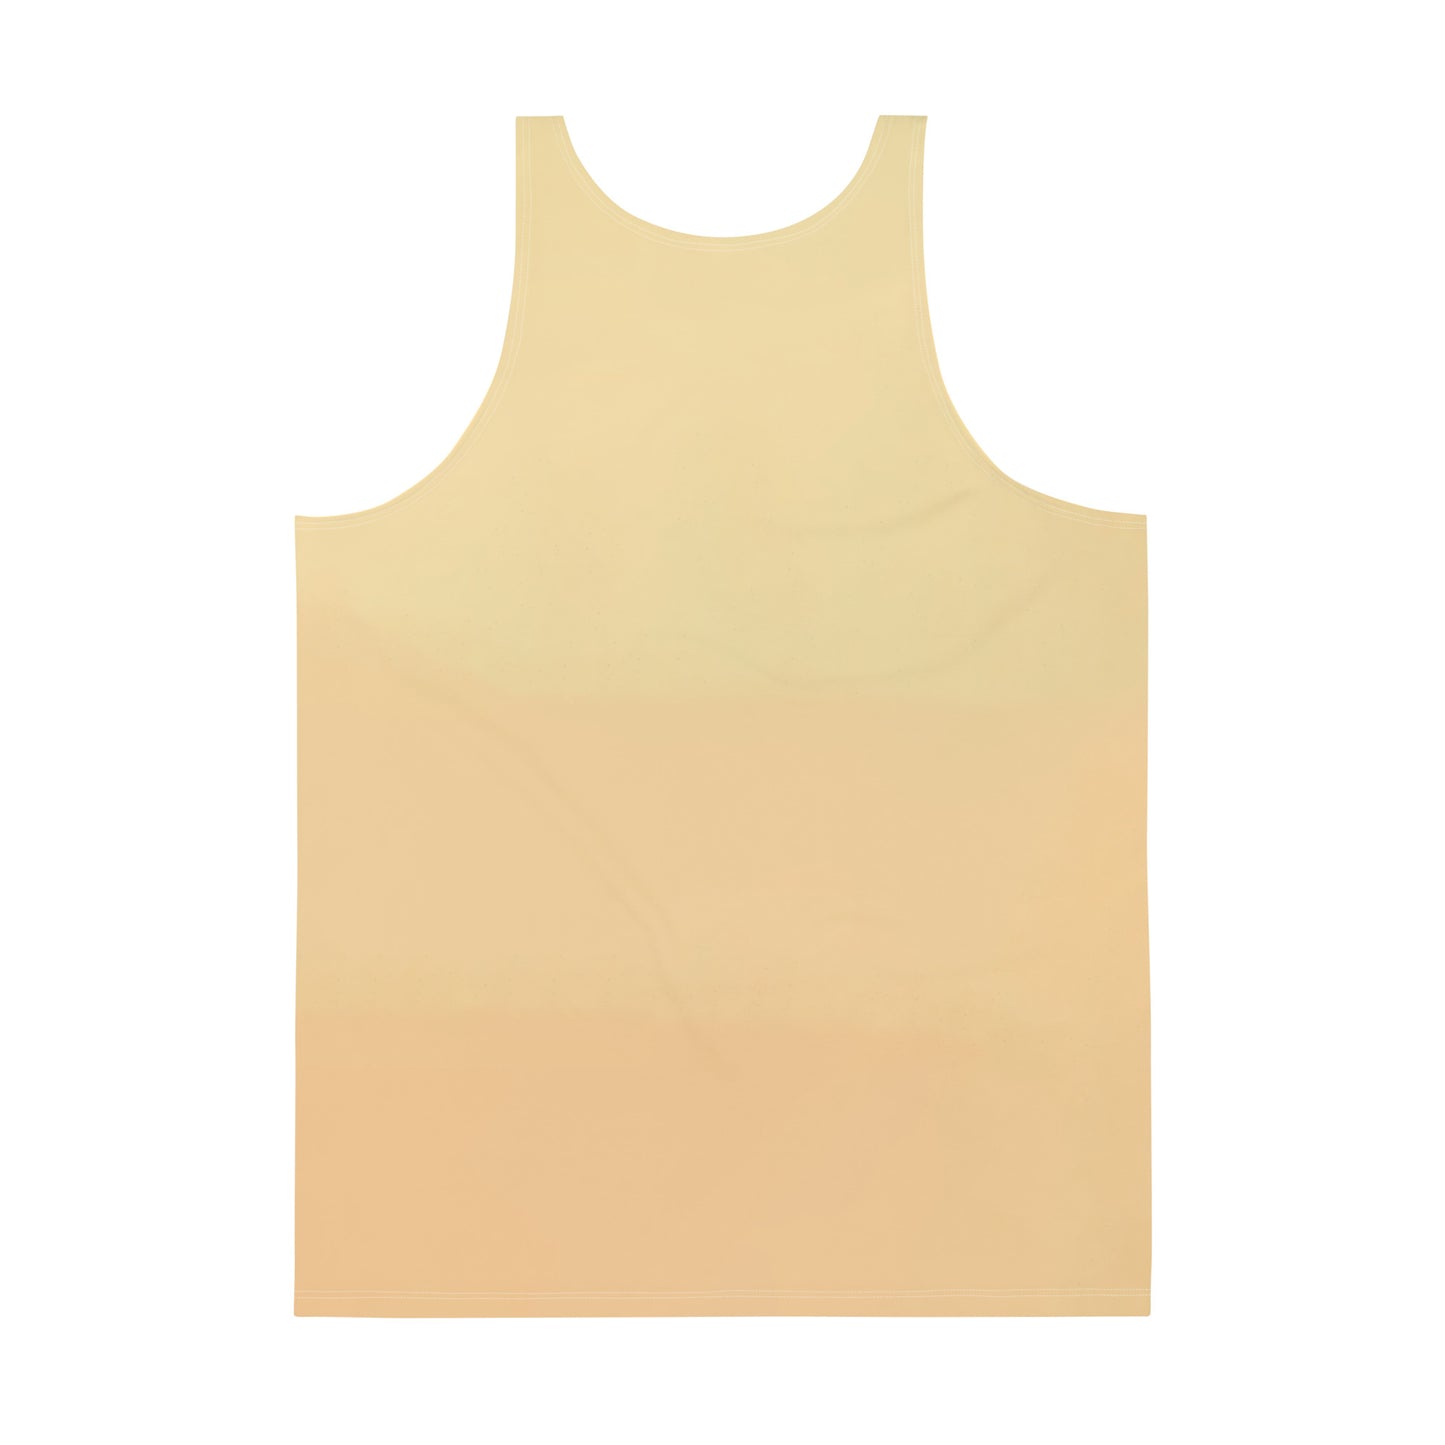 March Madness 2 - Unisex Tank Top